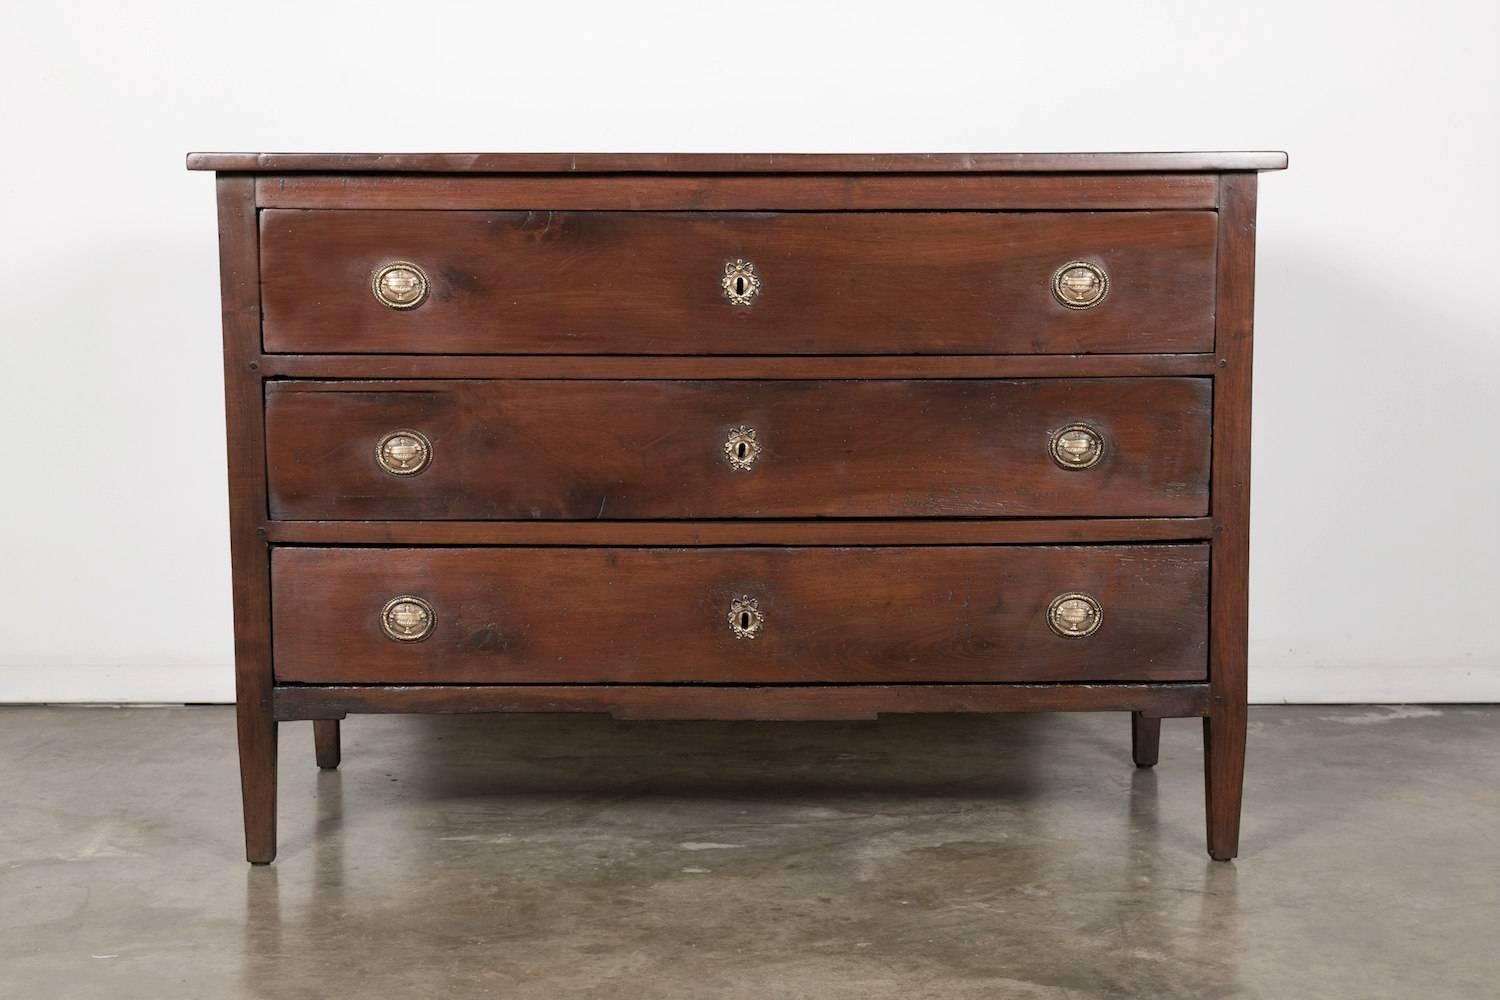 A fine 18th century period Louis XVI commode handcrafted in solid walnut by skilled artisans near Lyon, having three drawers adorned with original bronze hardware. Raised on tapered legs. The beauty is in the refinement of the details of this chest.